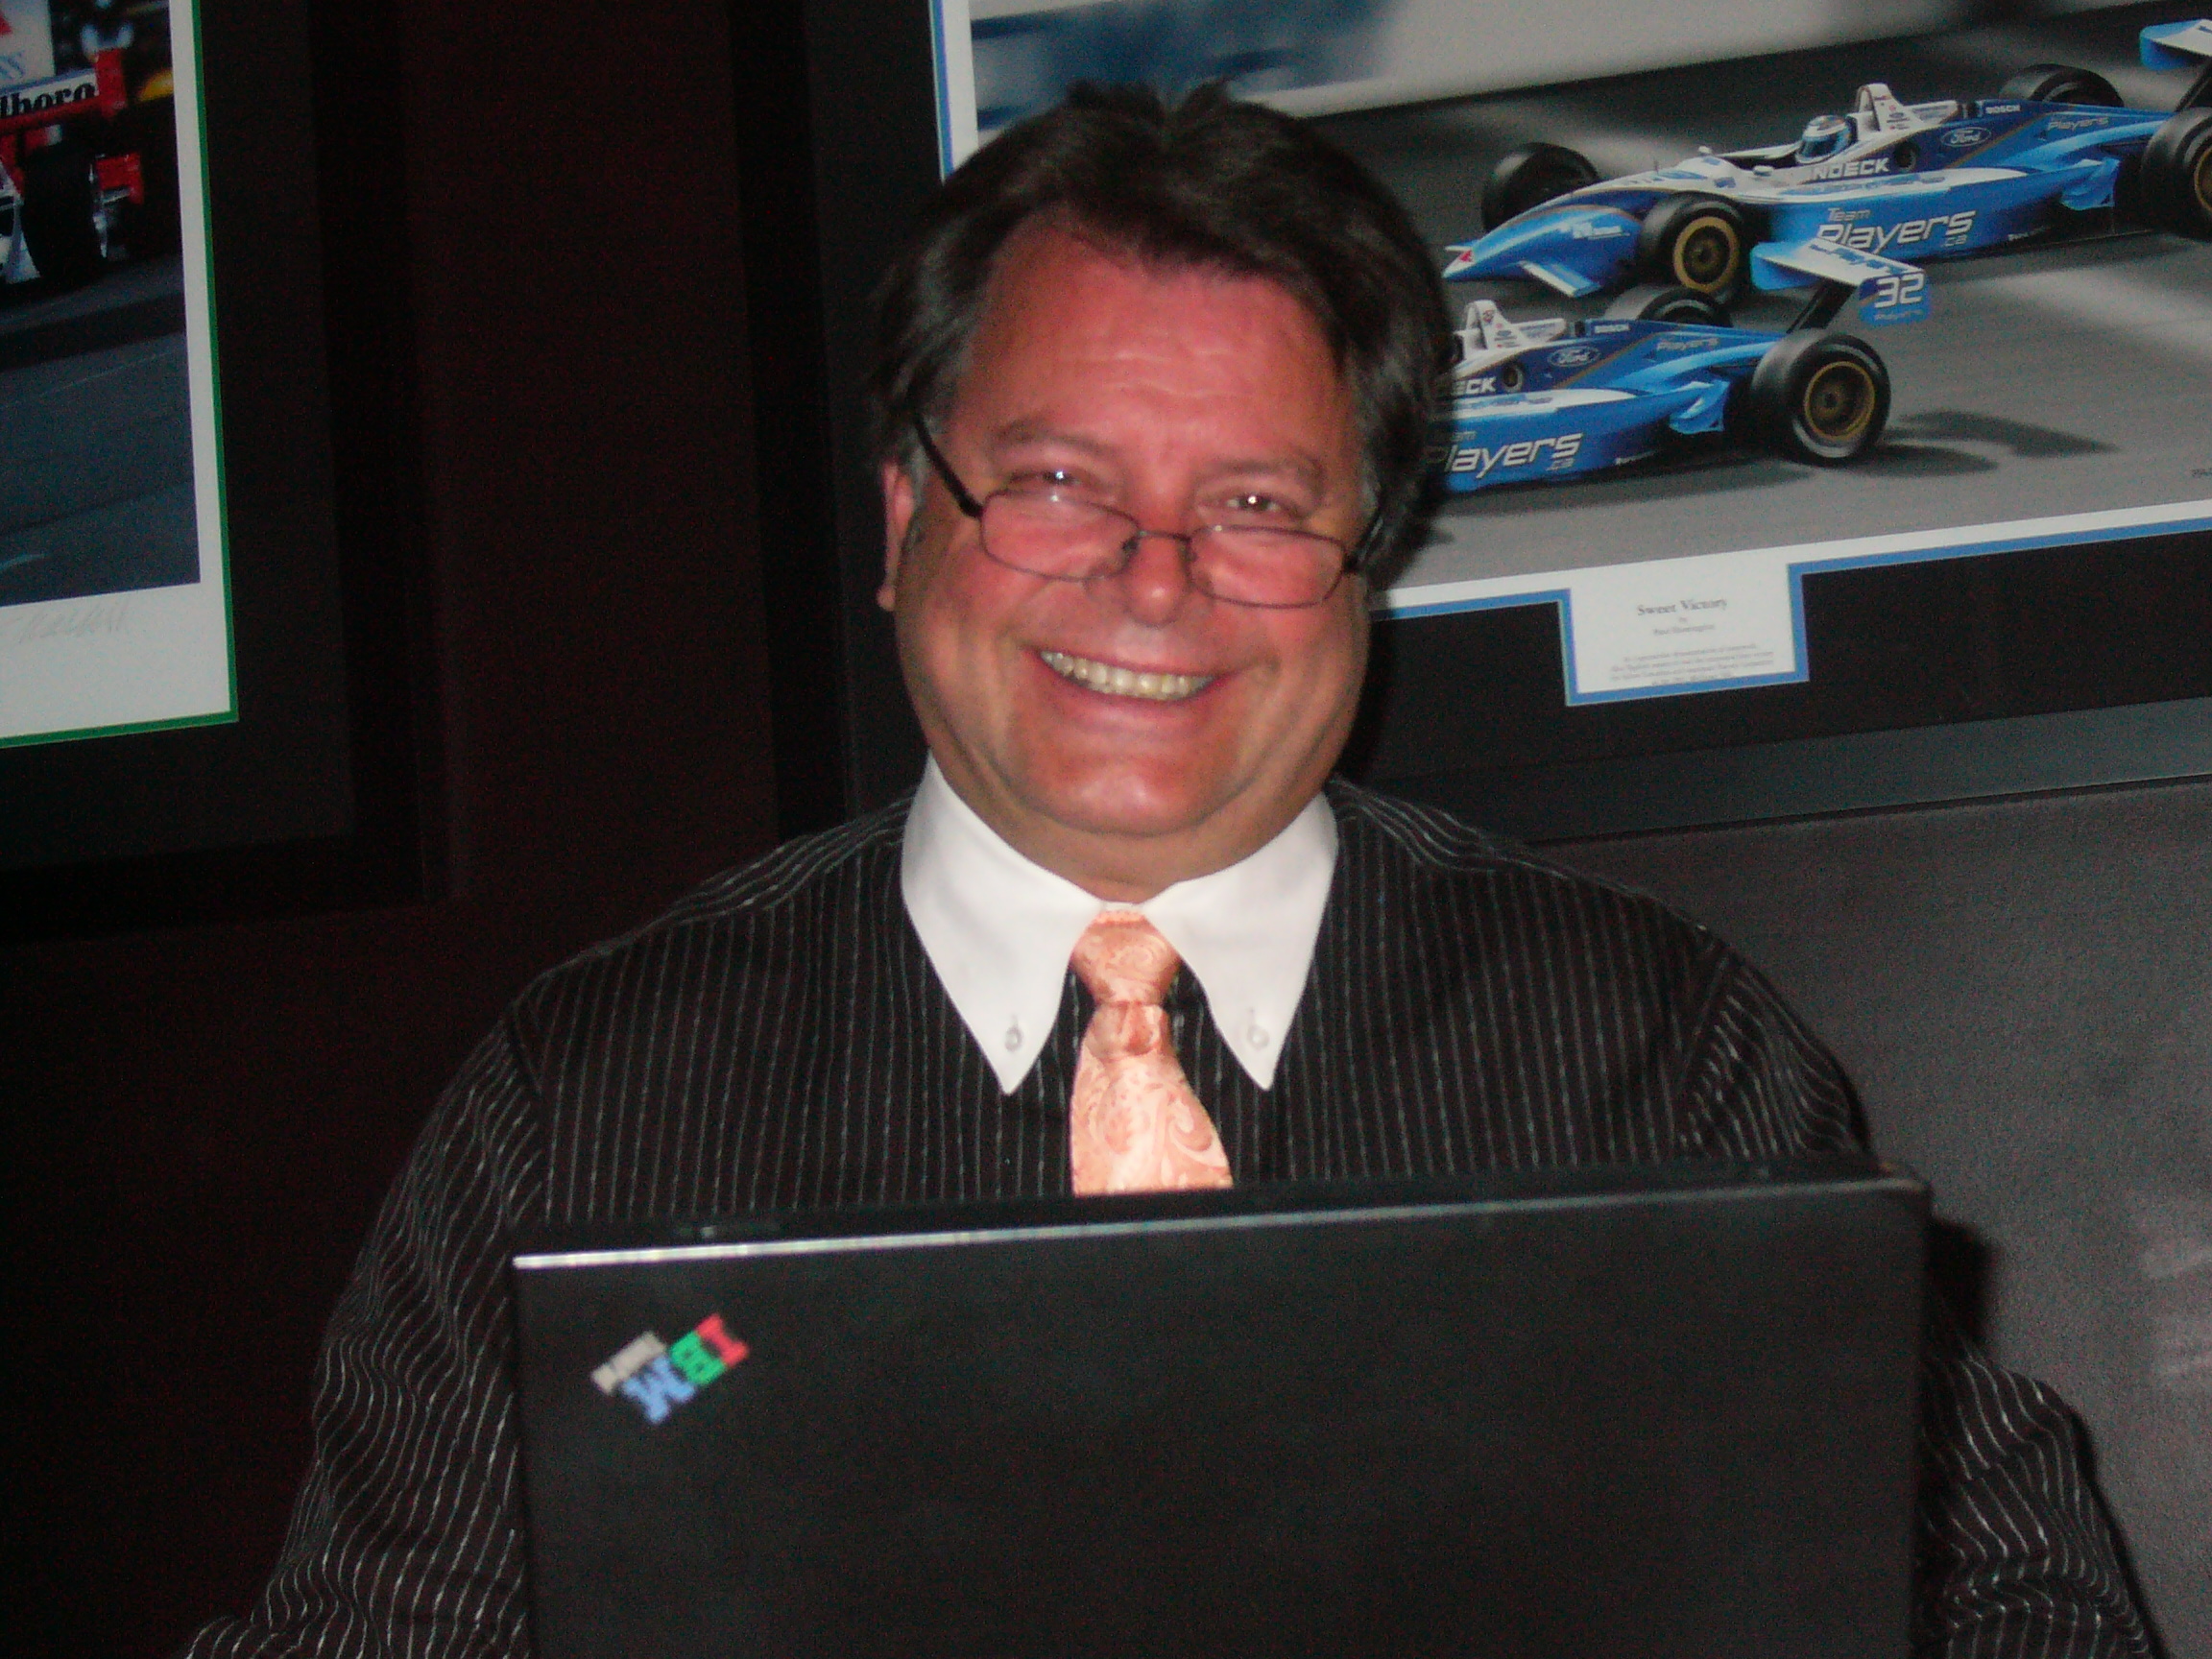 Colin in front of a black laptop. He is wearing glasses, a black striped dress shirt and a pink tie.